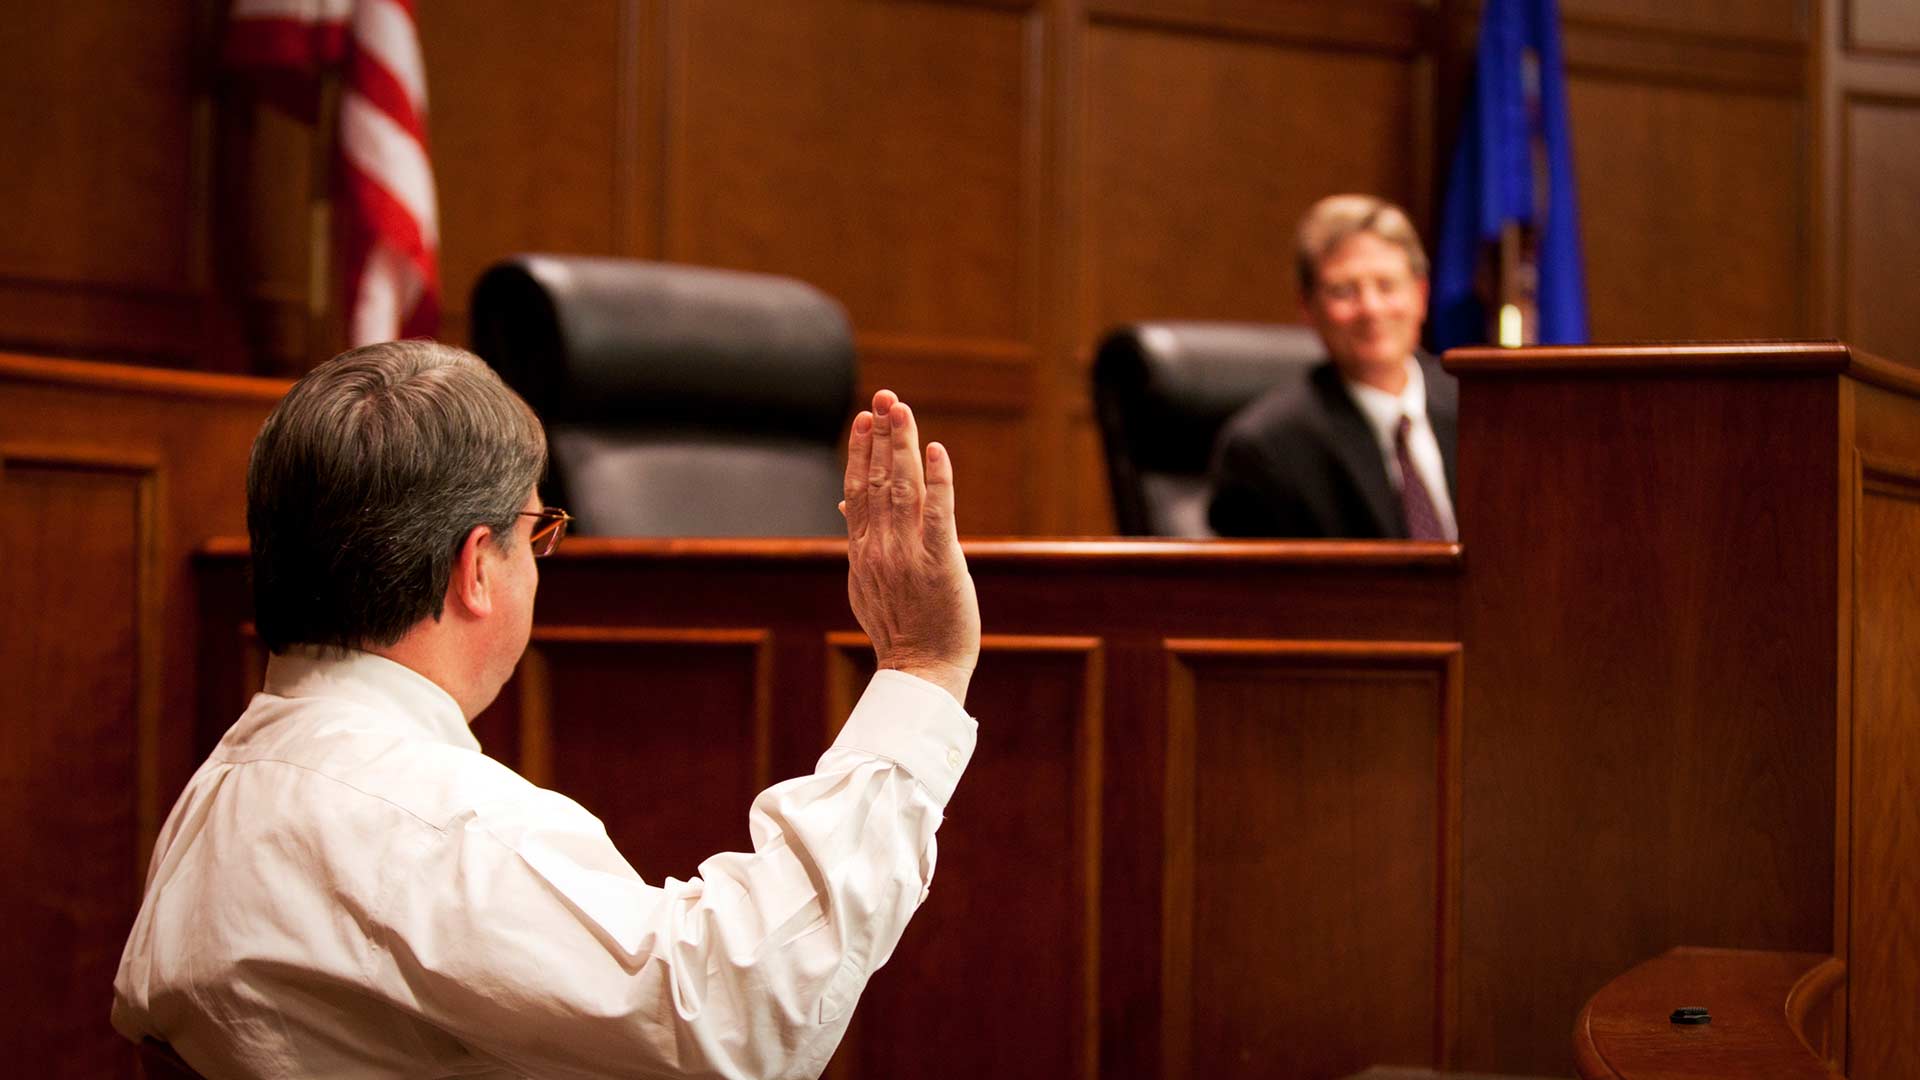 Witness raises their right hand before a judge.